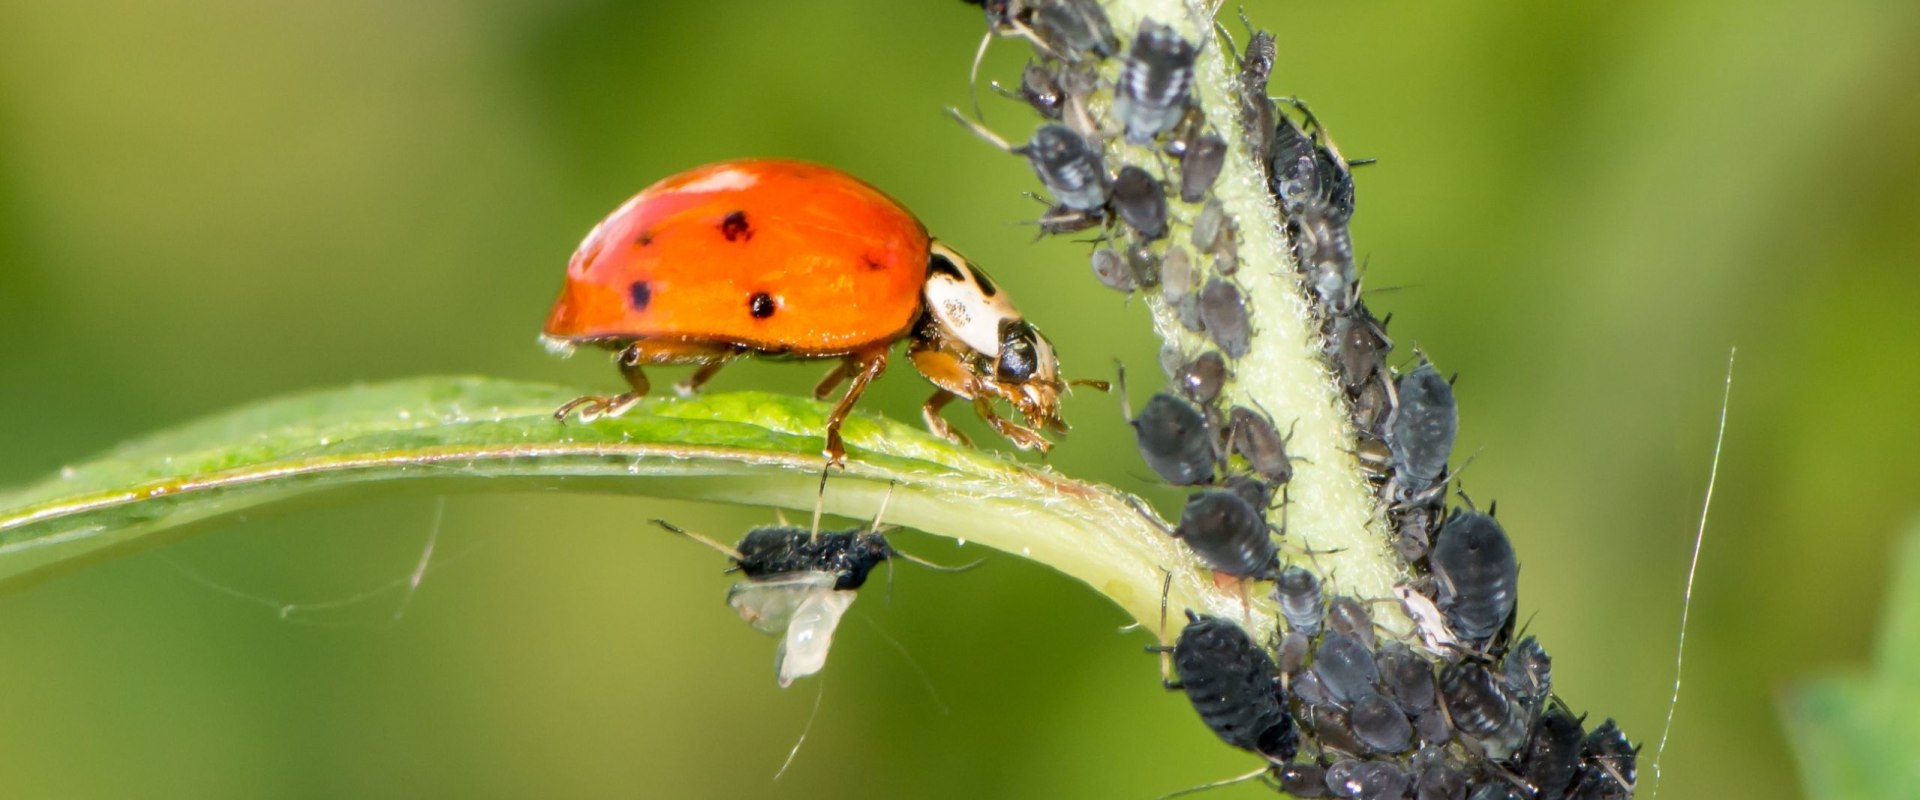 What are the 3 biological pest controls?